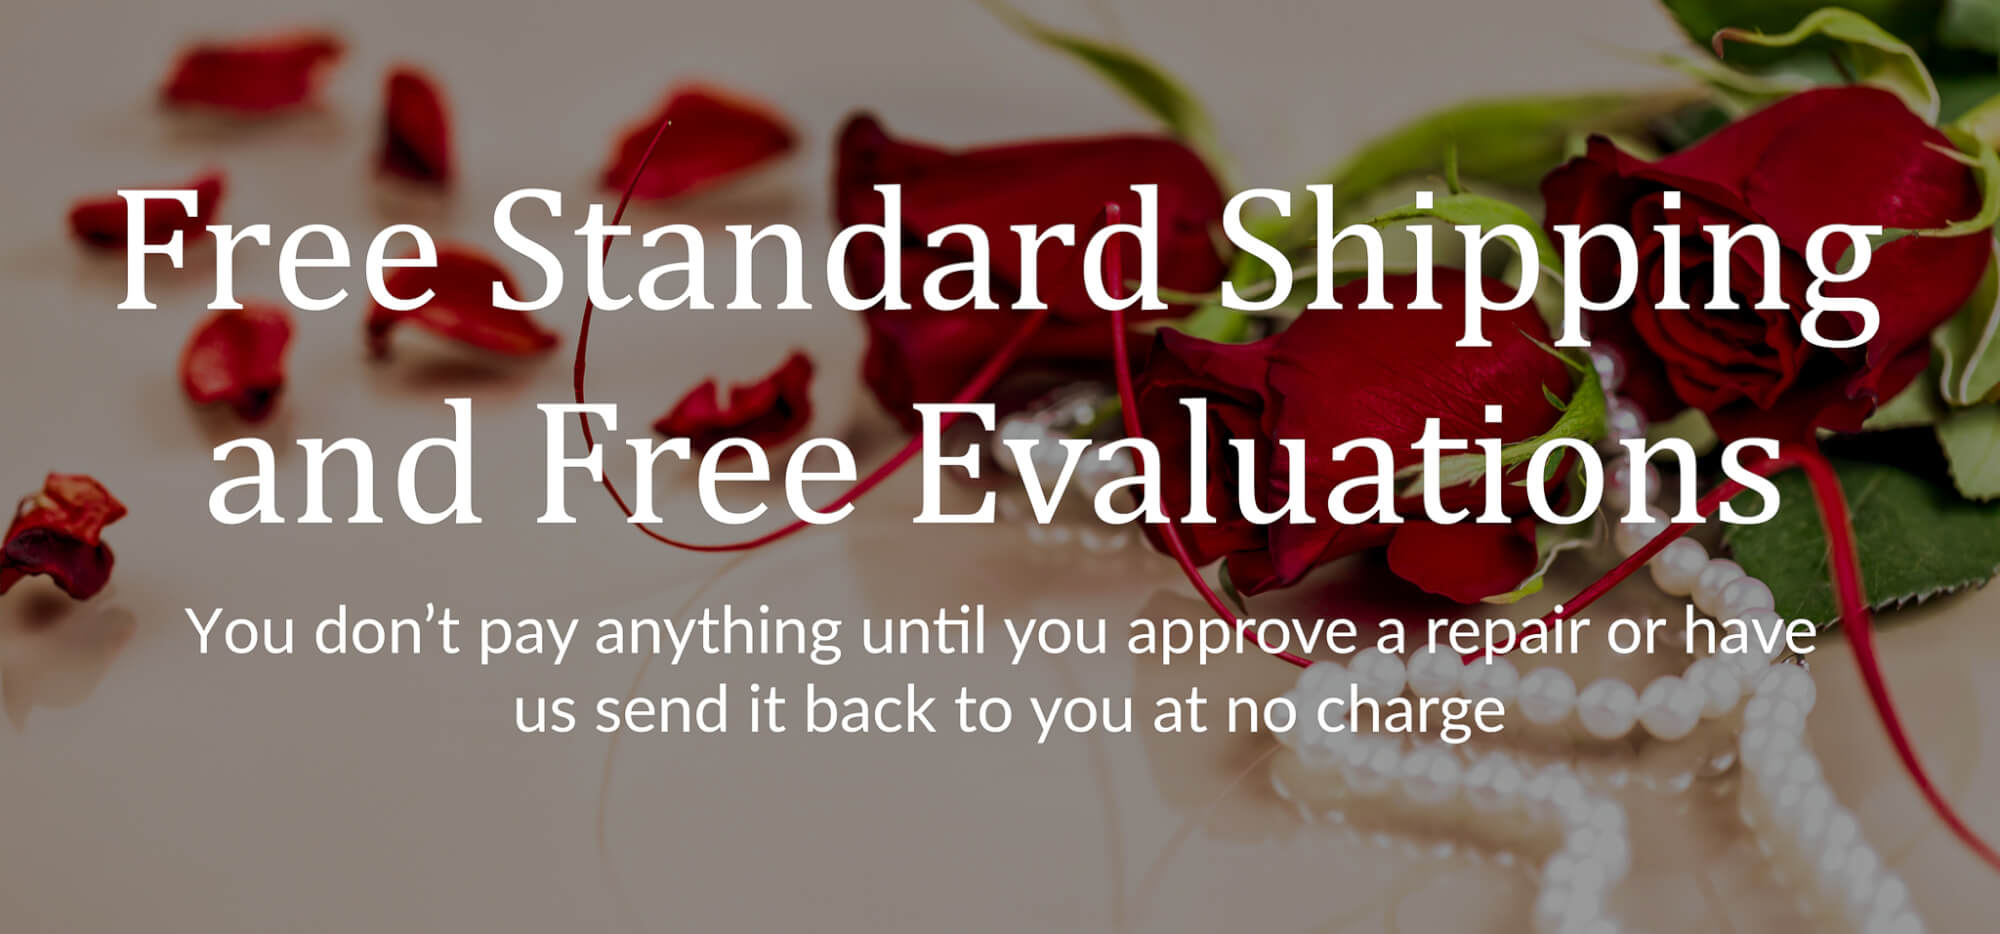 Banner Showing Free Evaluations & Shipping for Online Ring Repair by Mail